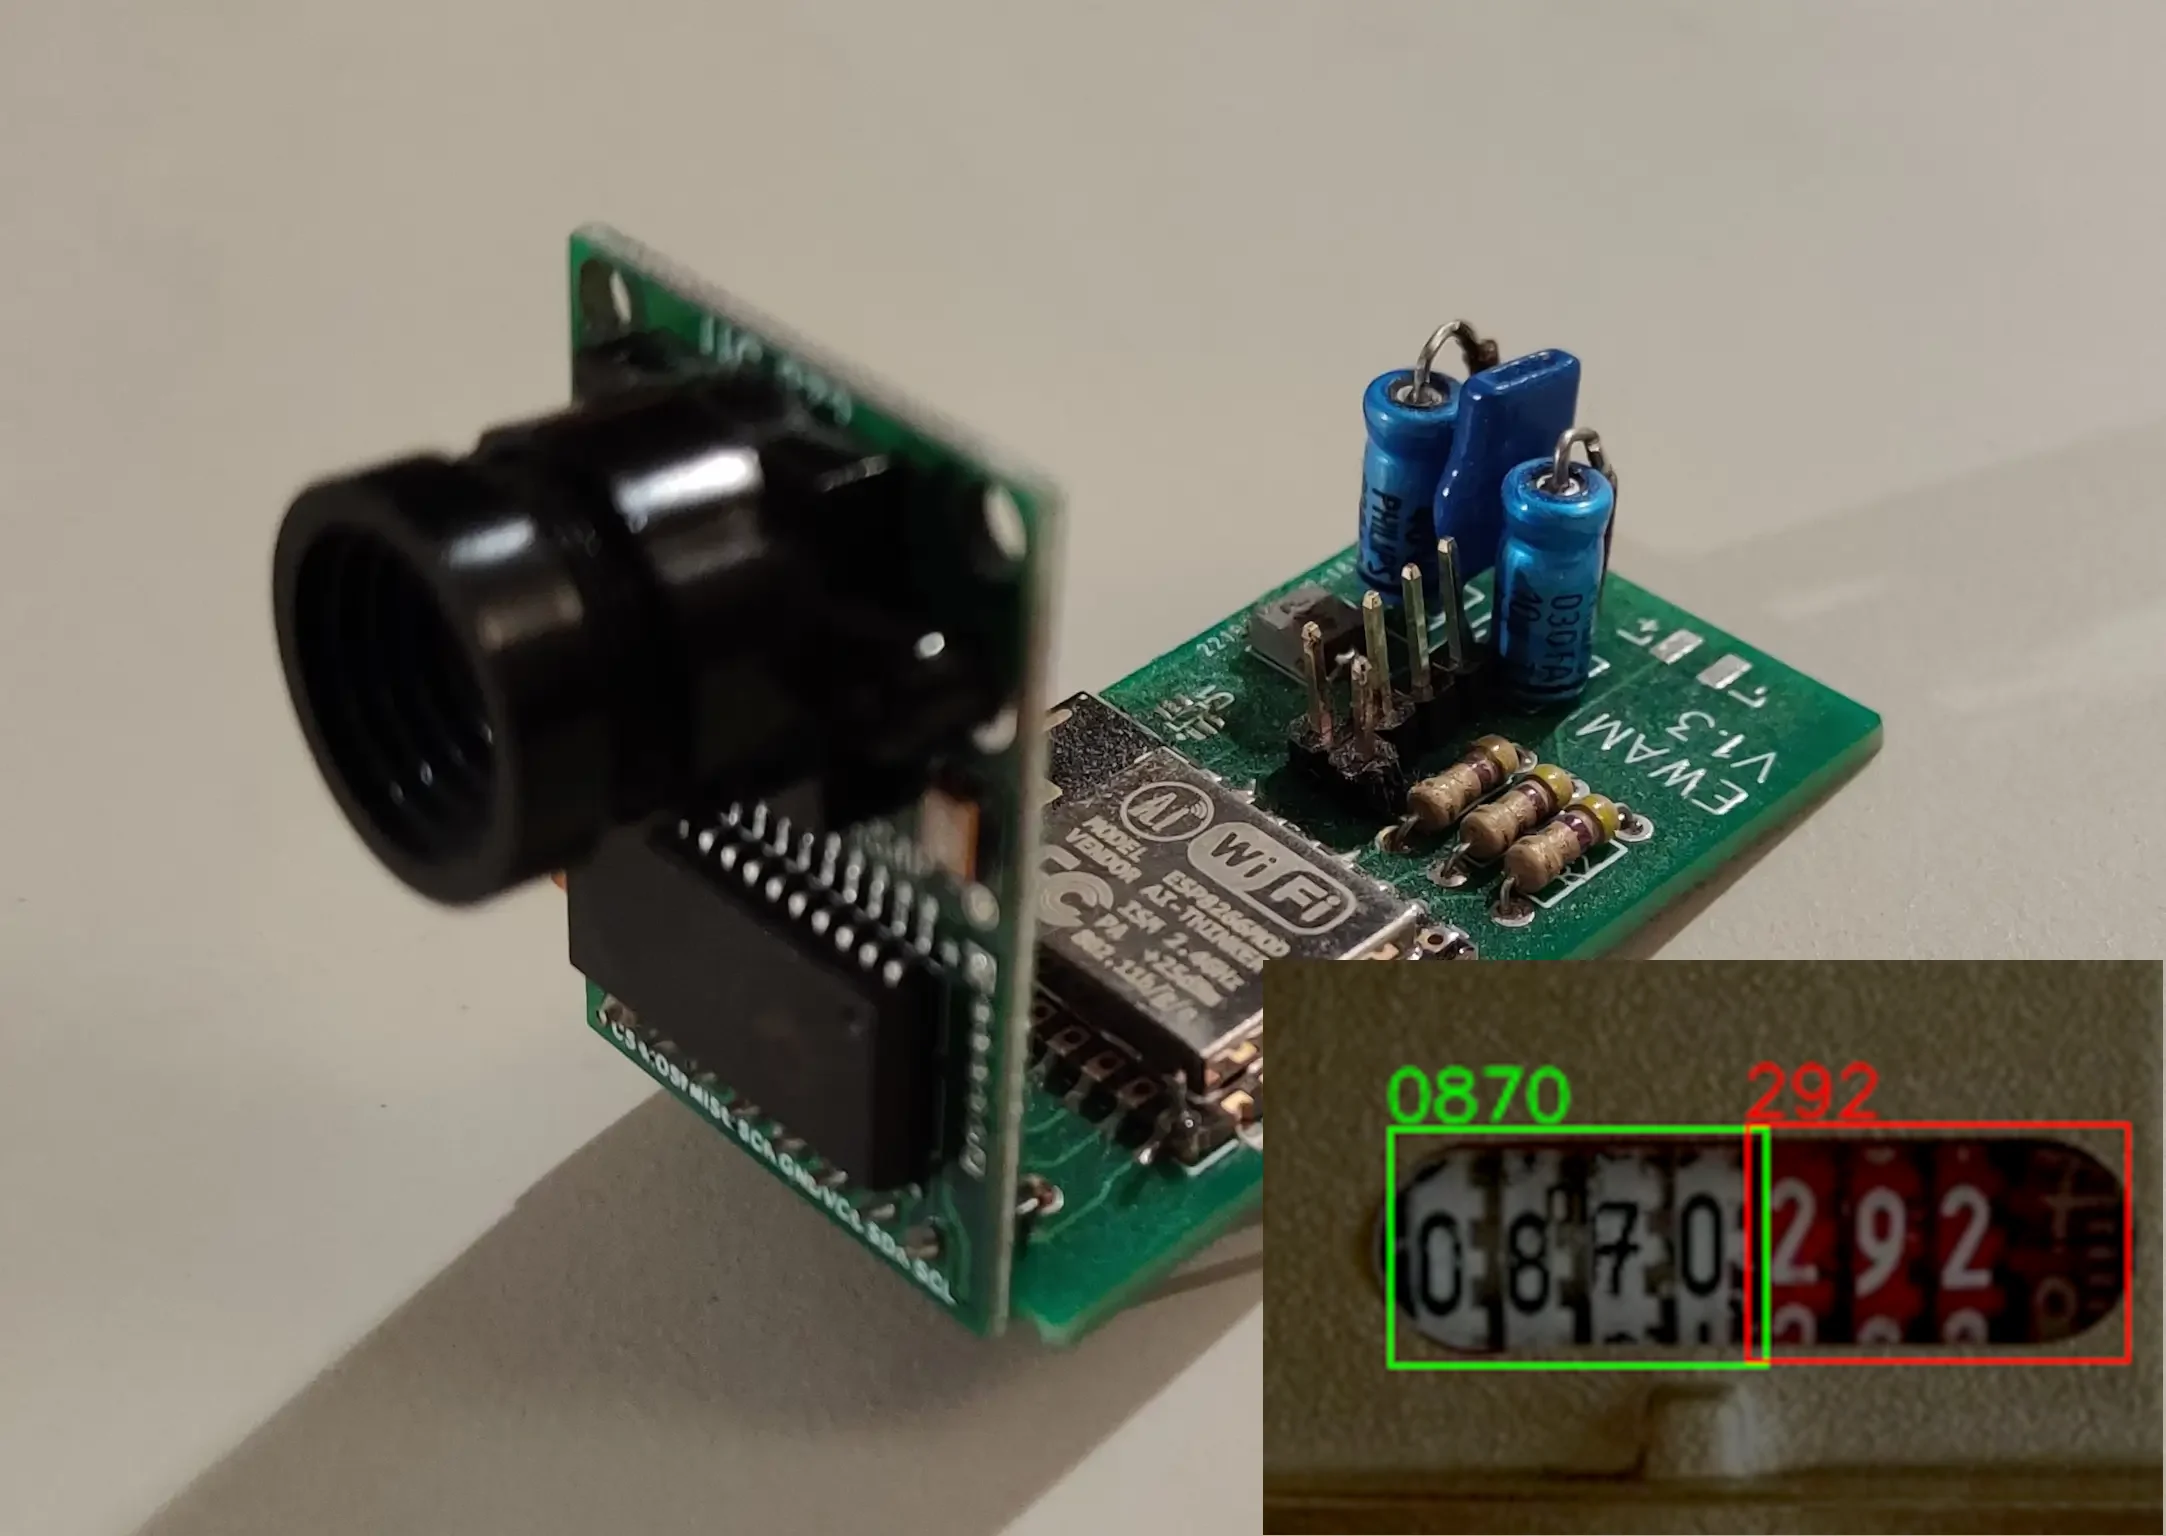 Picture of the Esp Water Meter PCB, showing circuitry and a small camera. The
bottom-right of image also shows digits being recognized by the neural
net.